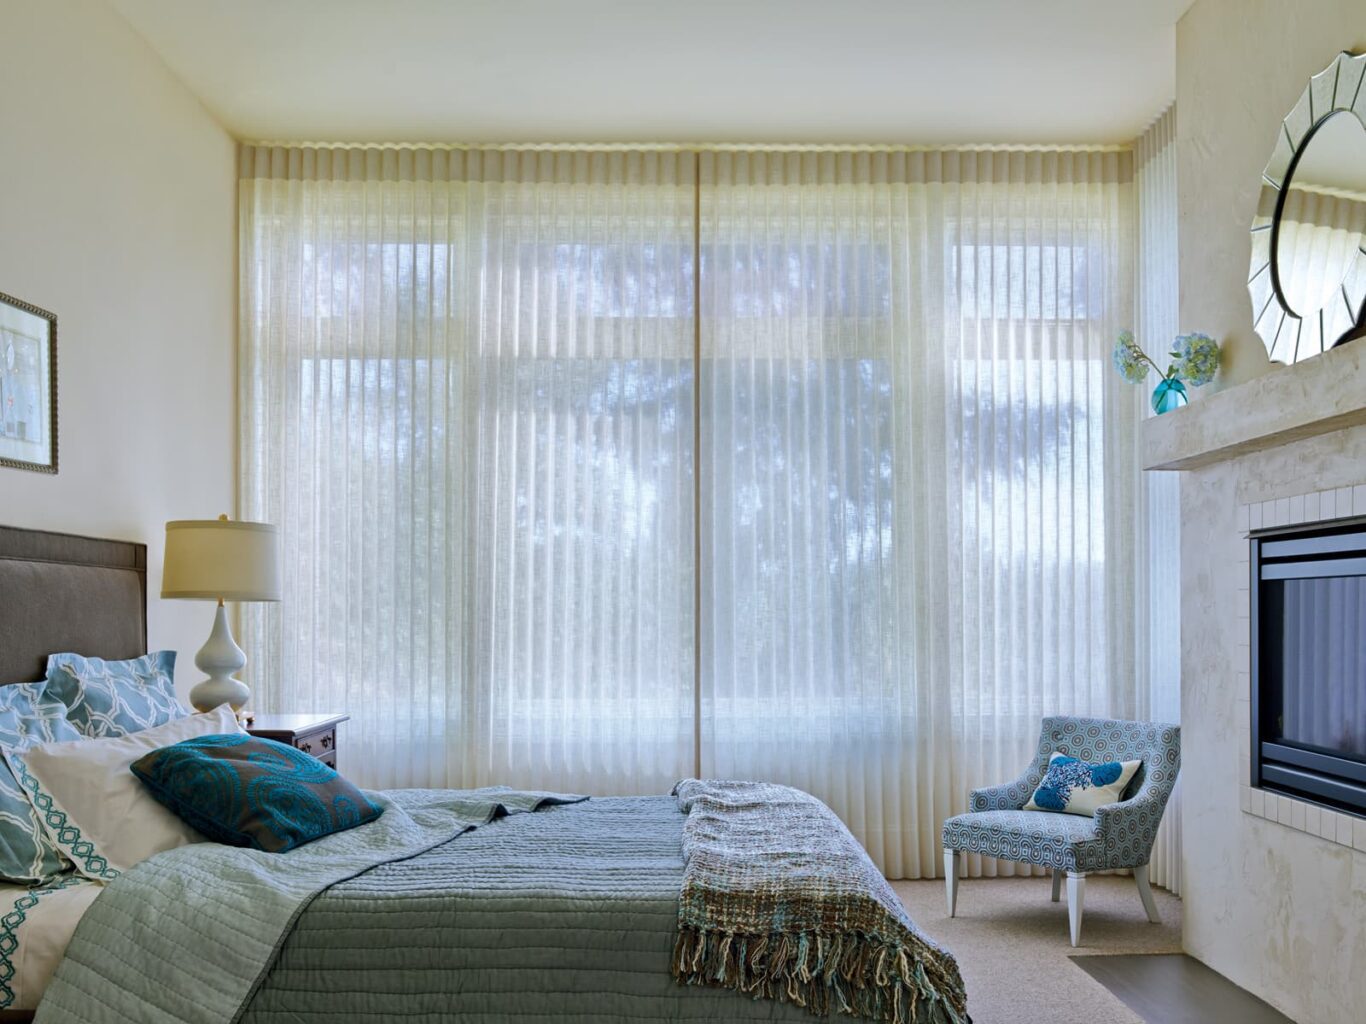 Luminette® Privacy Sheers